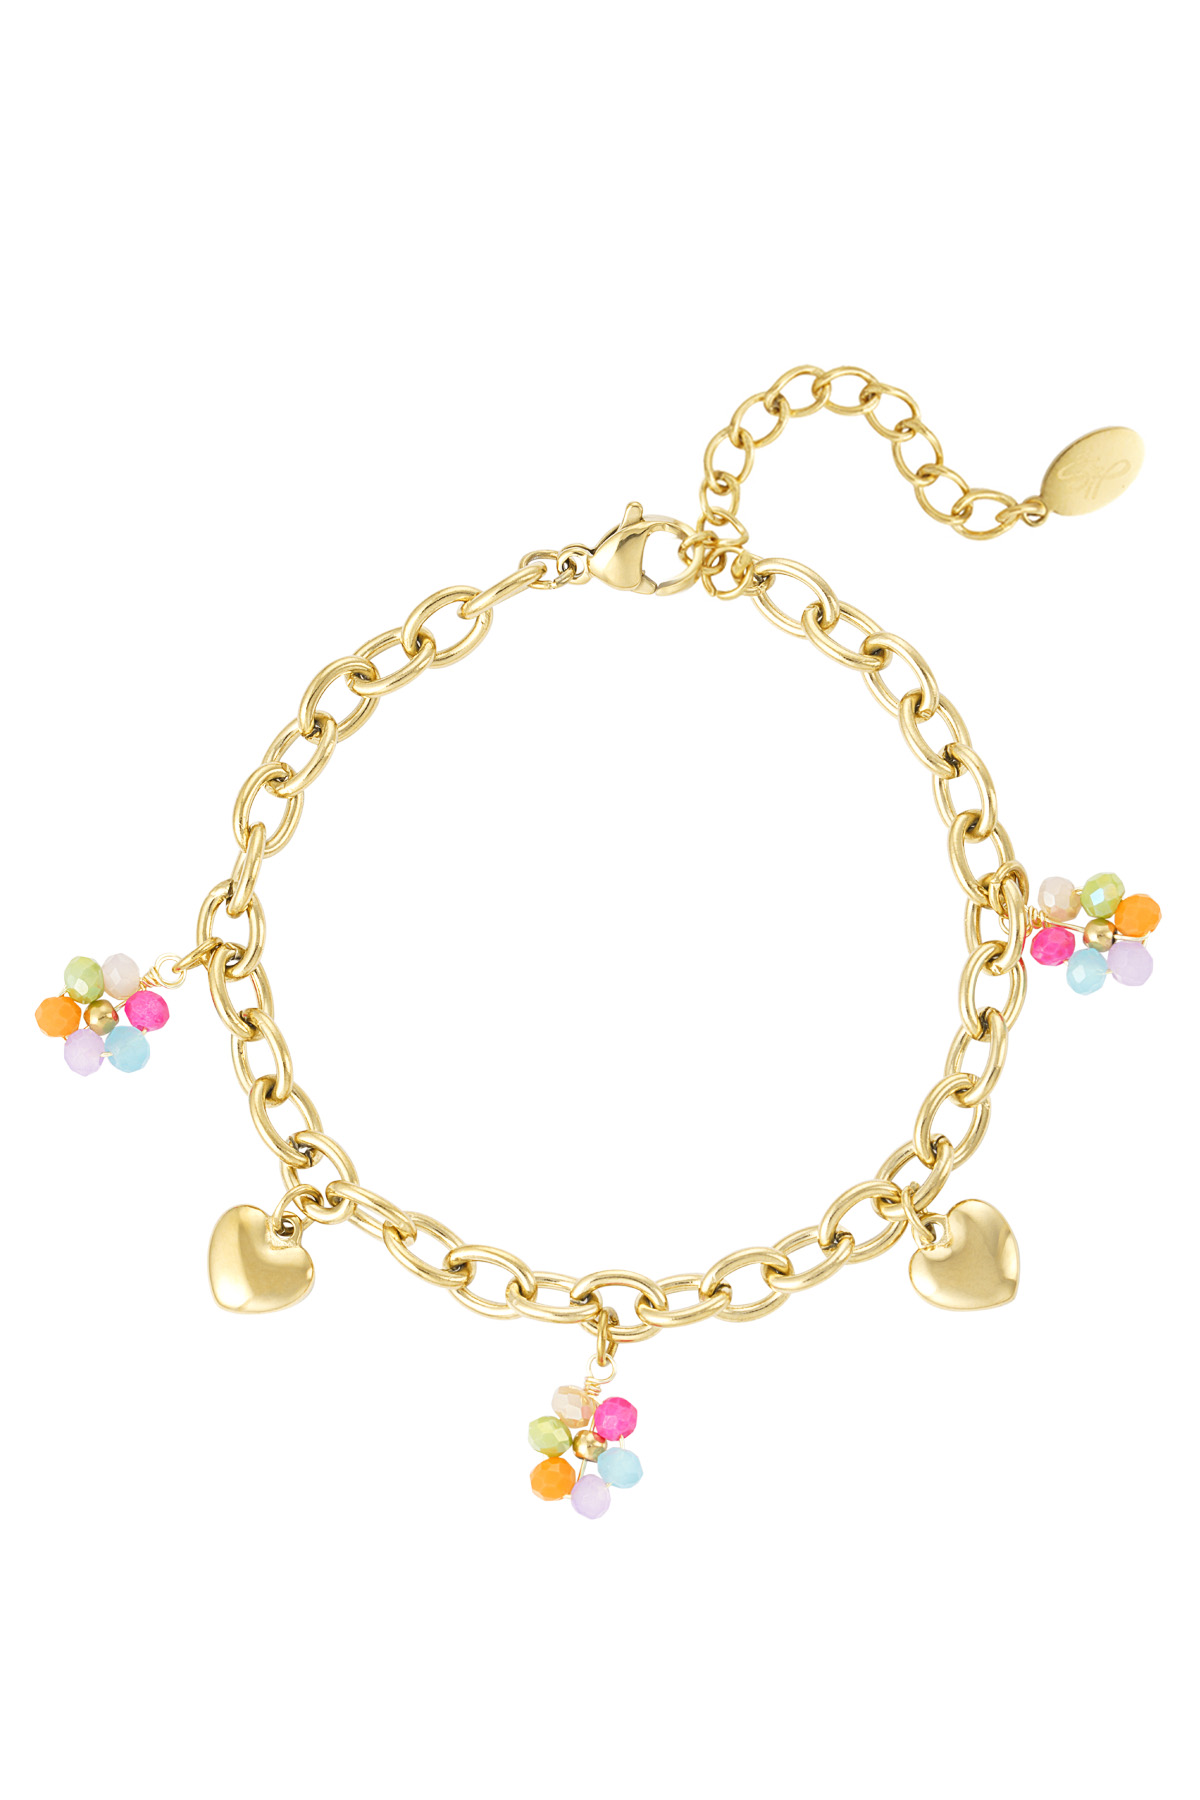 Charm bracelet with colored charms - gold